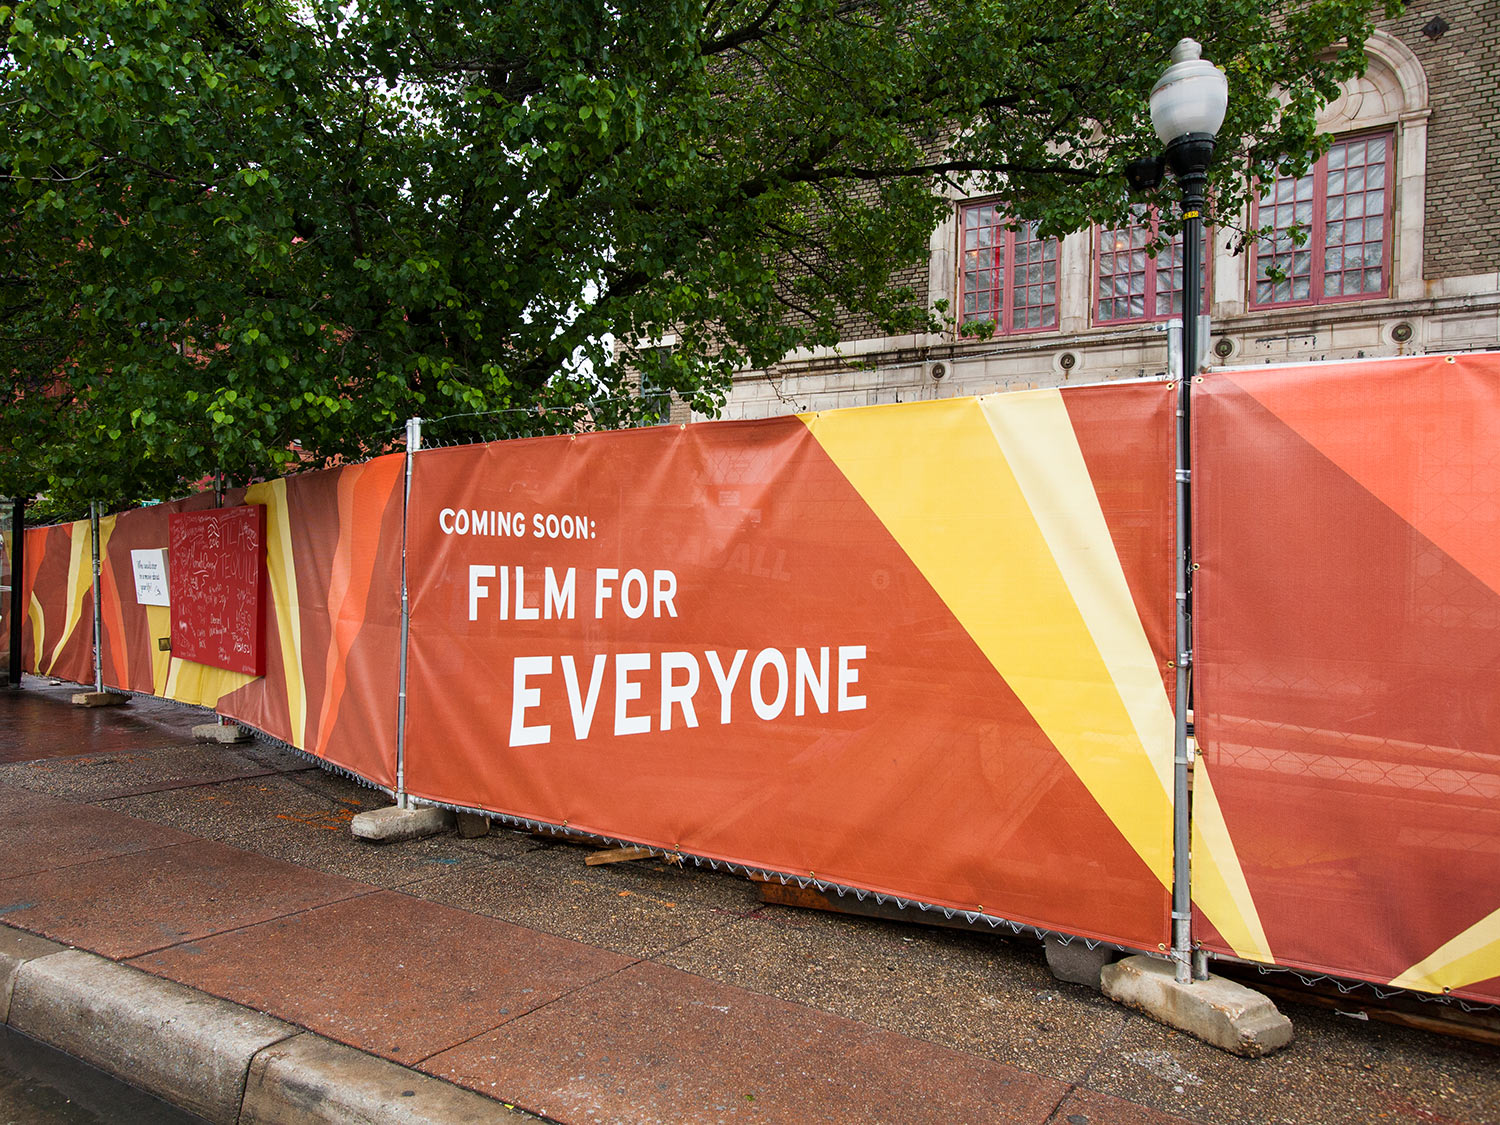 Interactive chalkboard construction fencing surrounding the Parkway Theatre in Baltimore during its renovation by the Maryland Film Festival